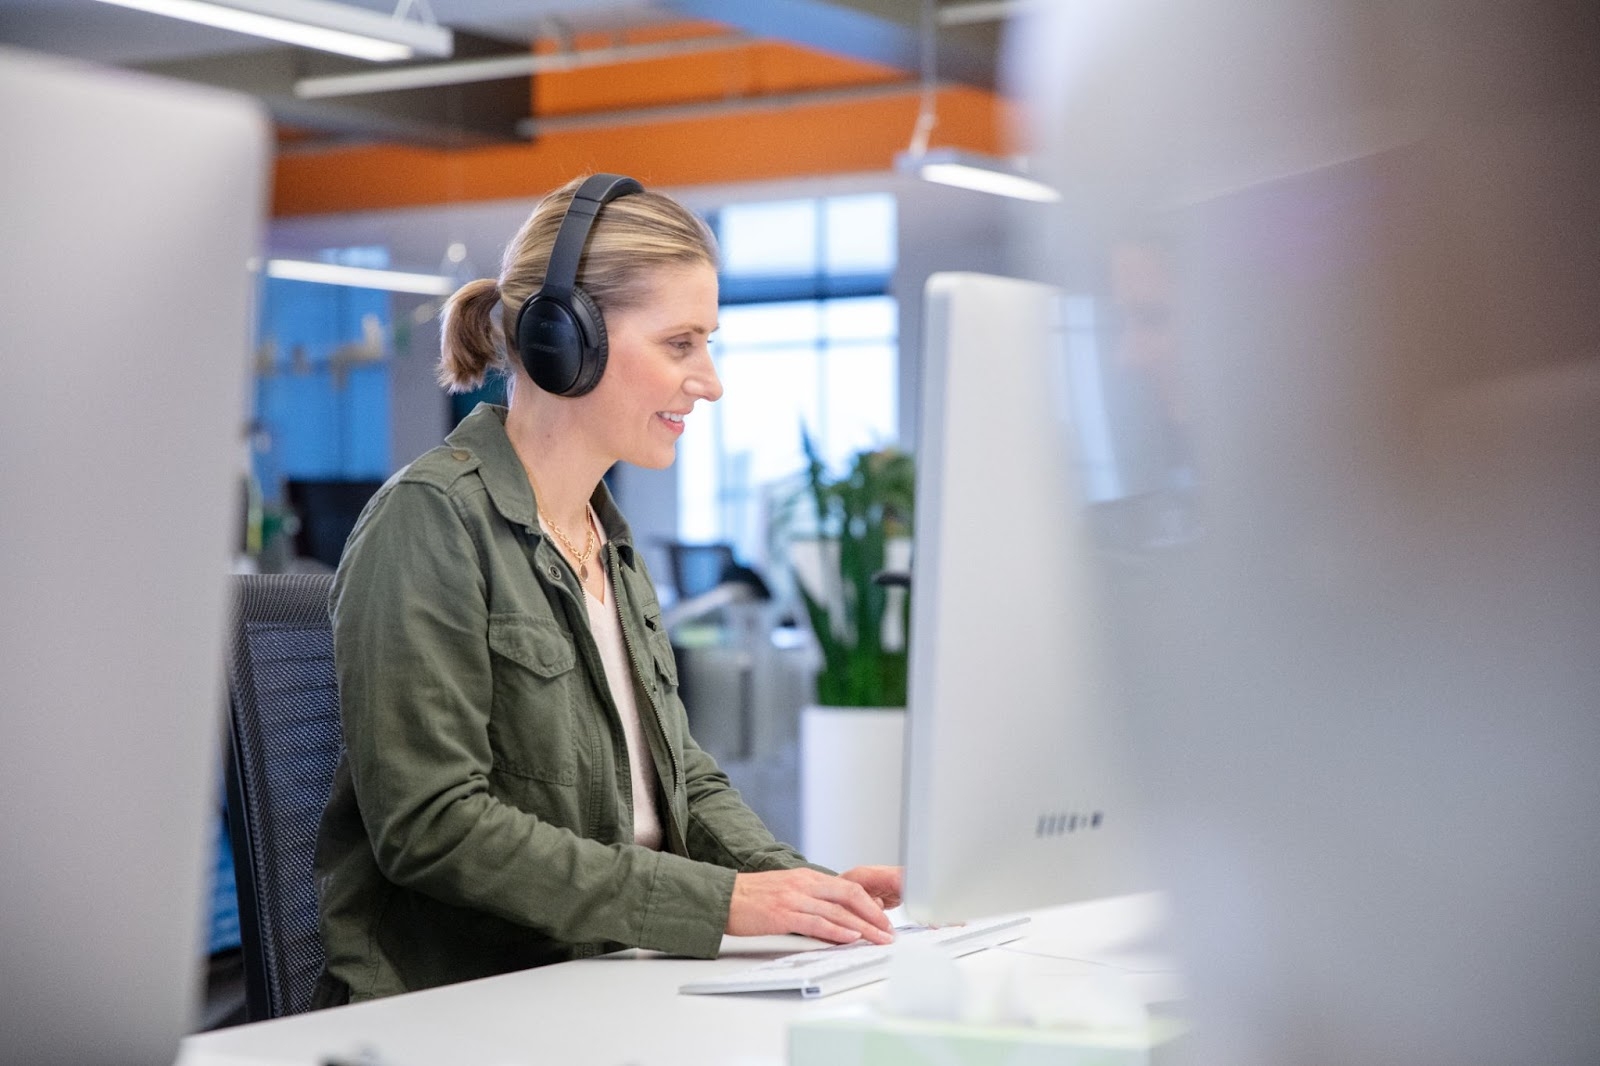 A customer support agent using a call center solution with a preview dialer